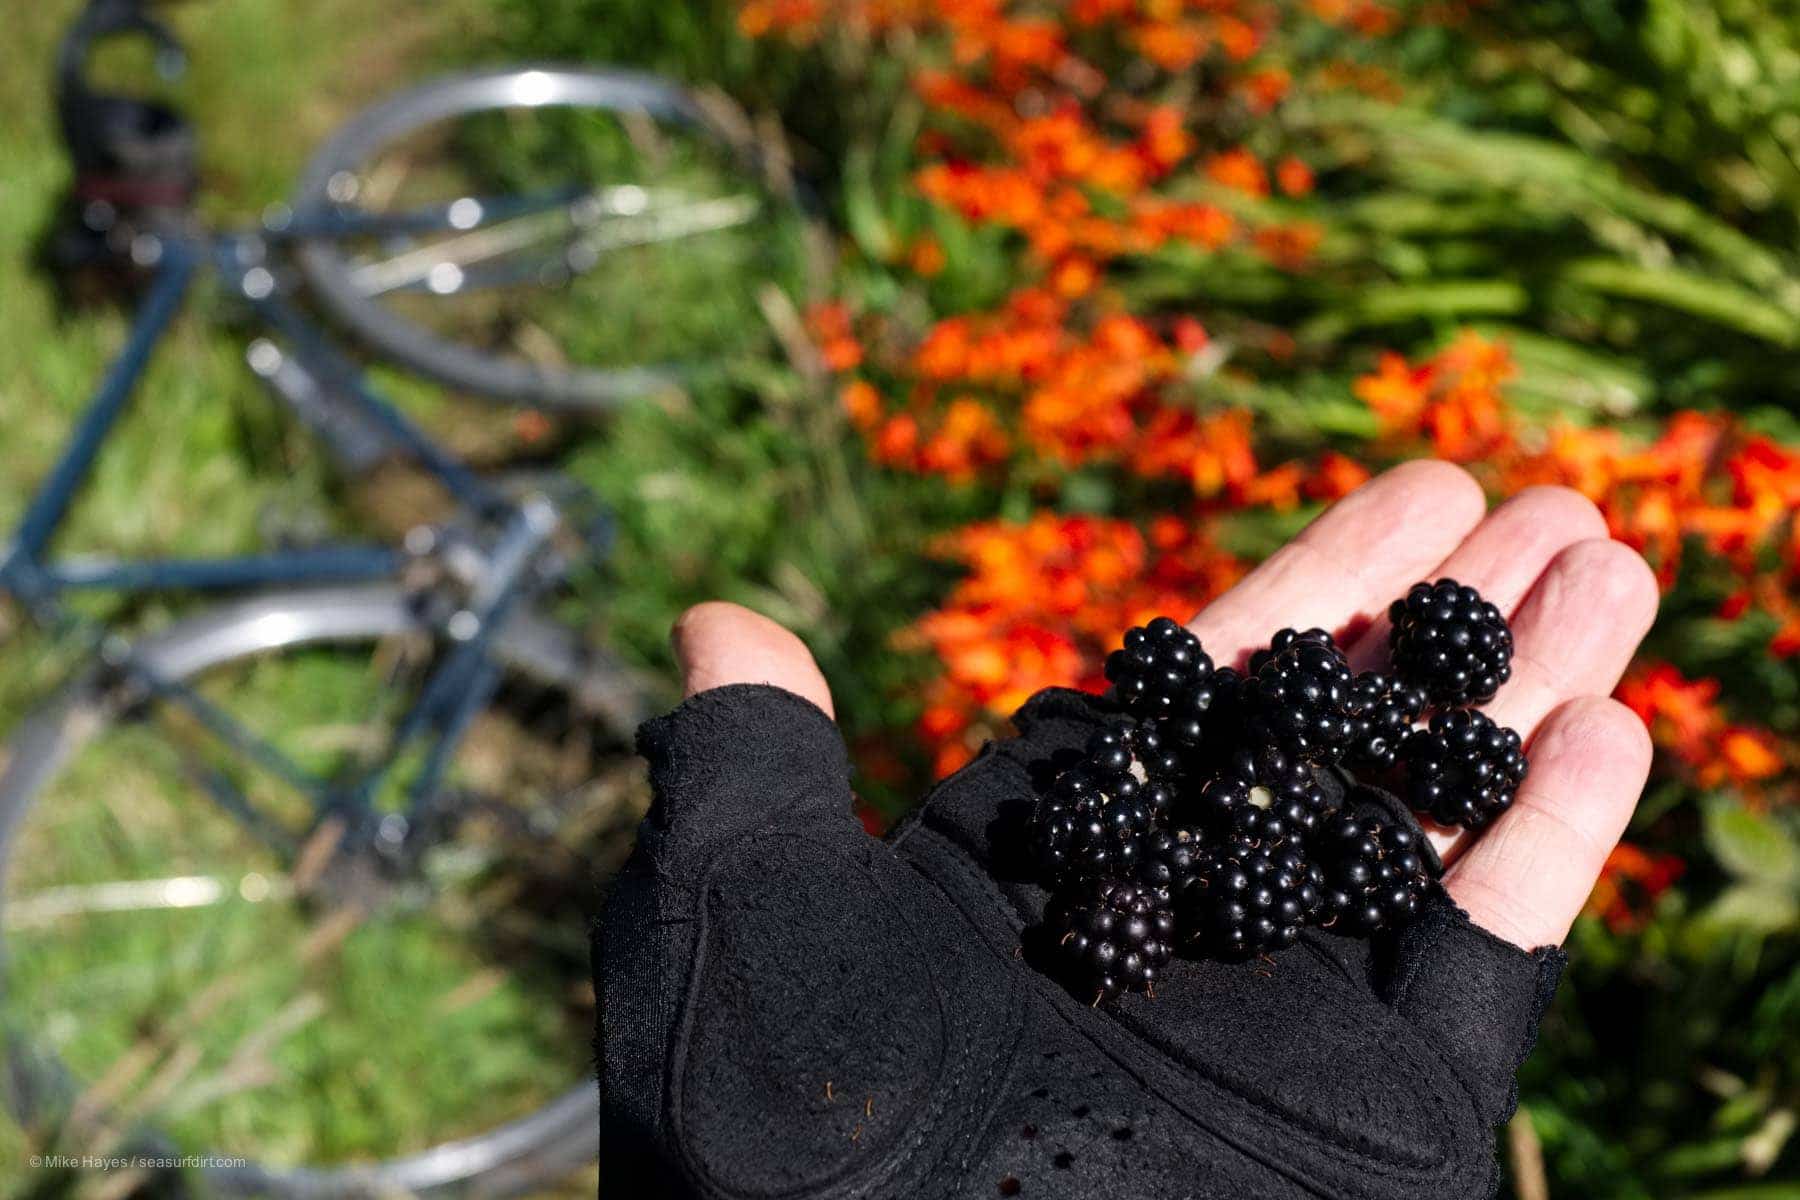 a handful of blackberries with bicycle and wildflowers in the background.